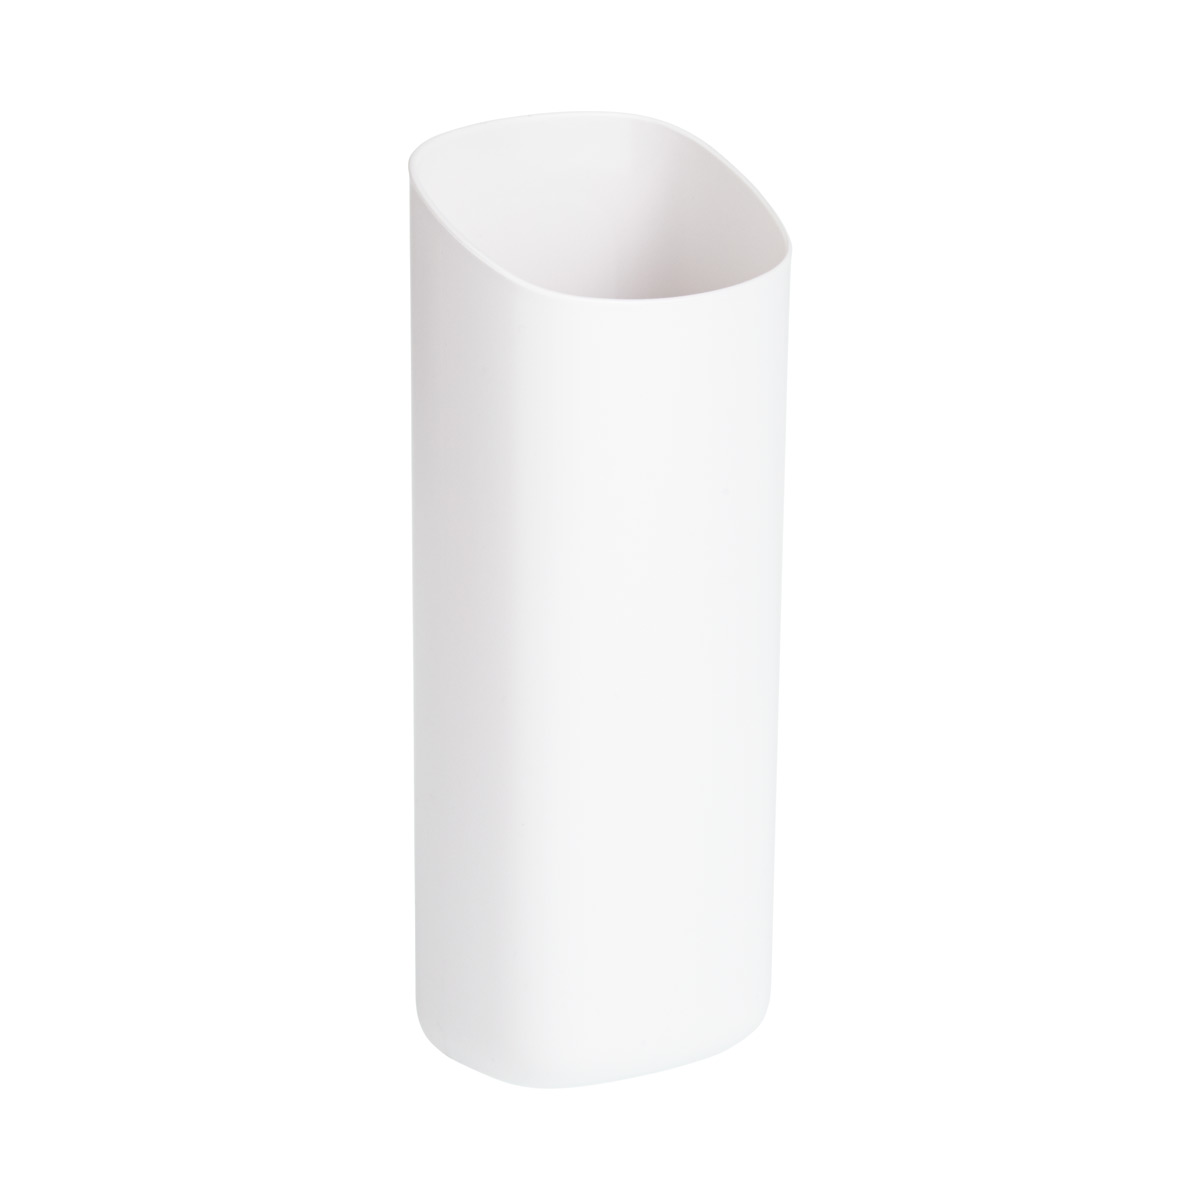 Perch Twiggy Magnetic Container White